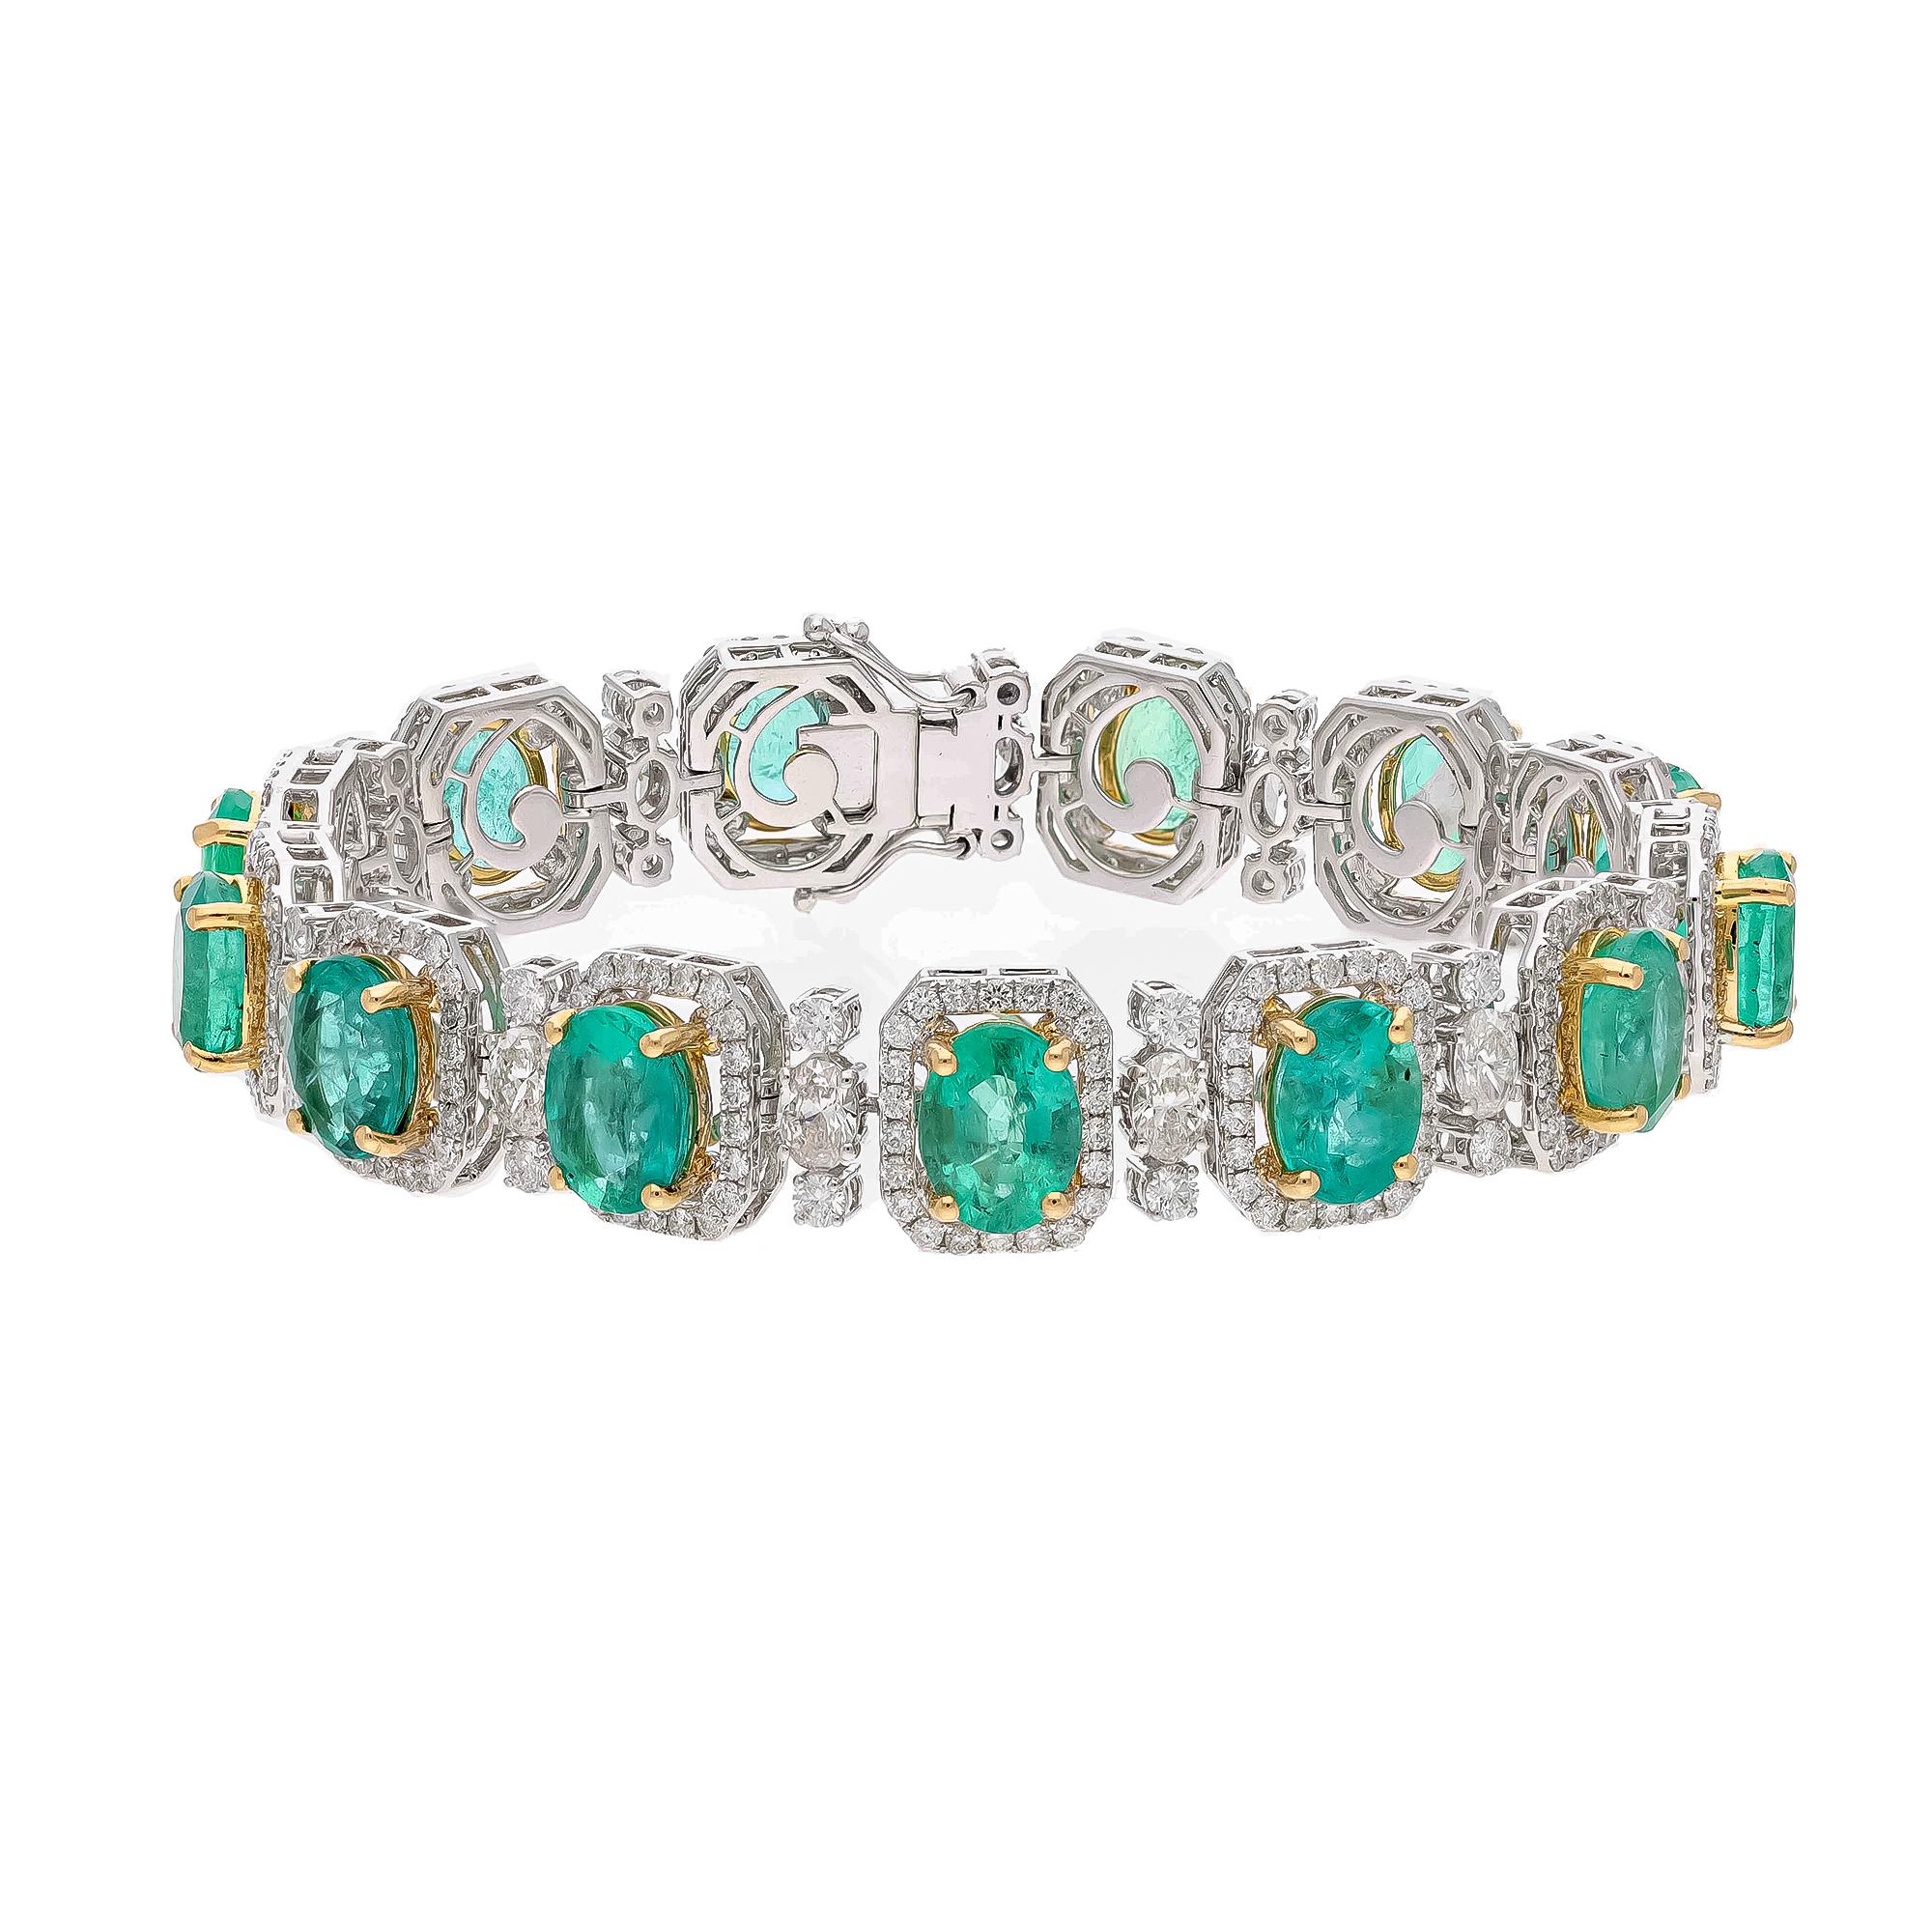 This is a natural Zambian Emerald bracelet with diamonds and 18k gold. The emeralds are very high quality and very good quality diamonds the clarity is vsi and G colour


Emeralds : 24.66 carats
diamonds : 7.90 carats
gold : 33.238 gms

This is a